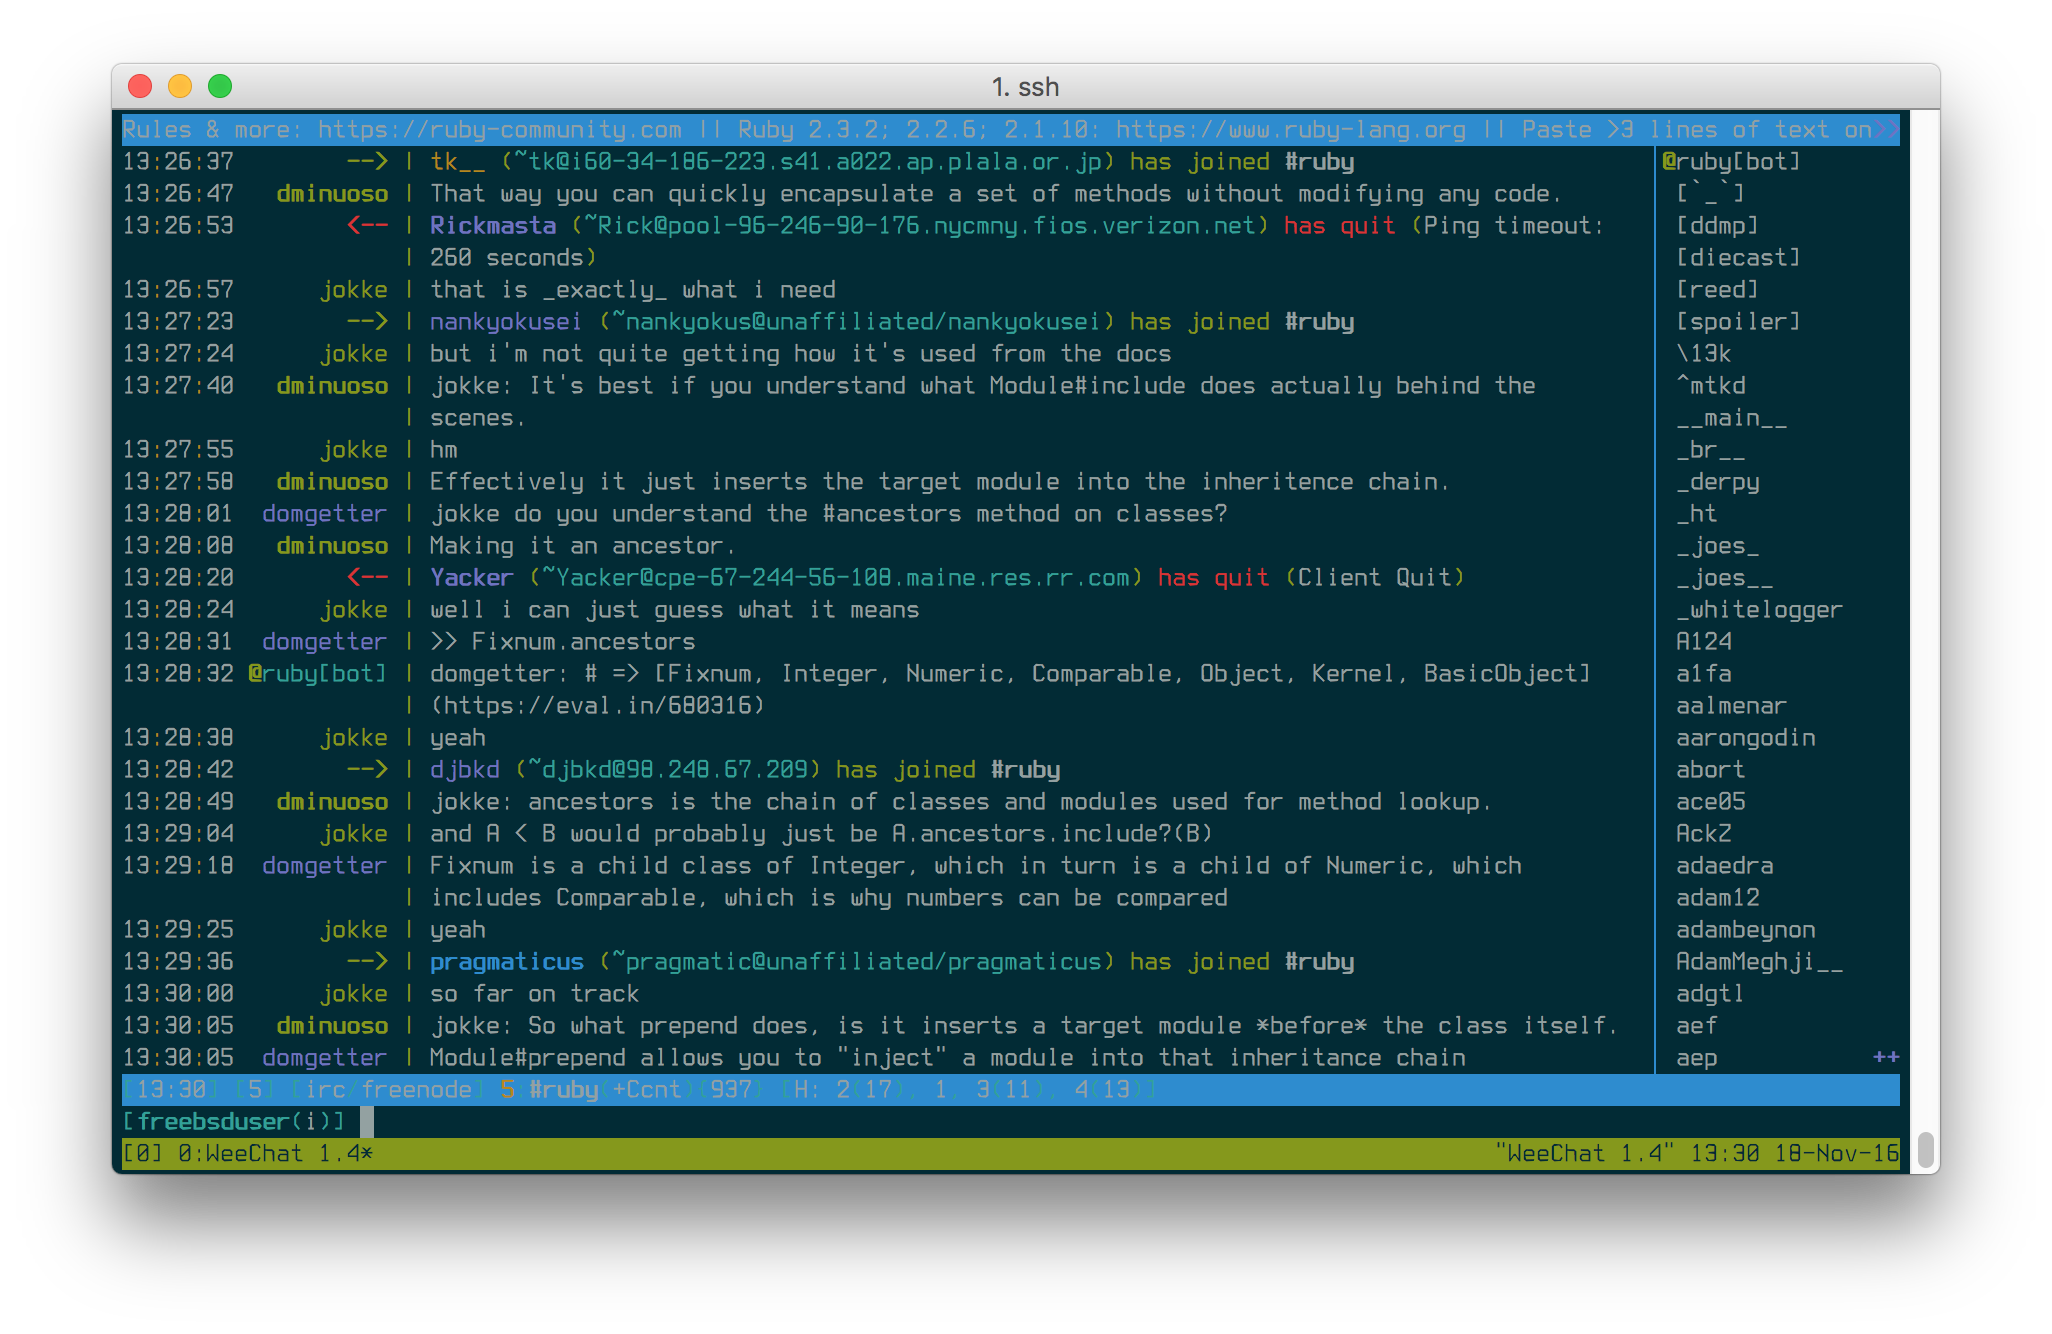 Chatting on weechat w/ tmux